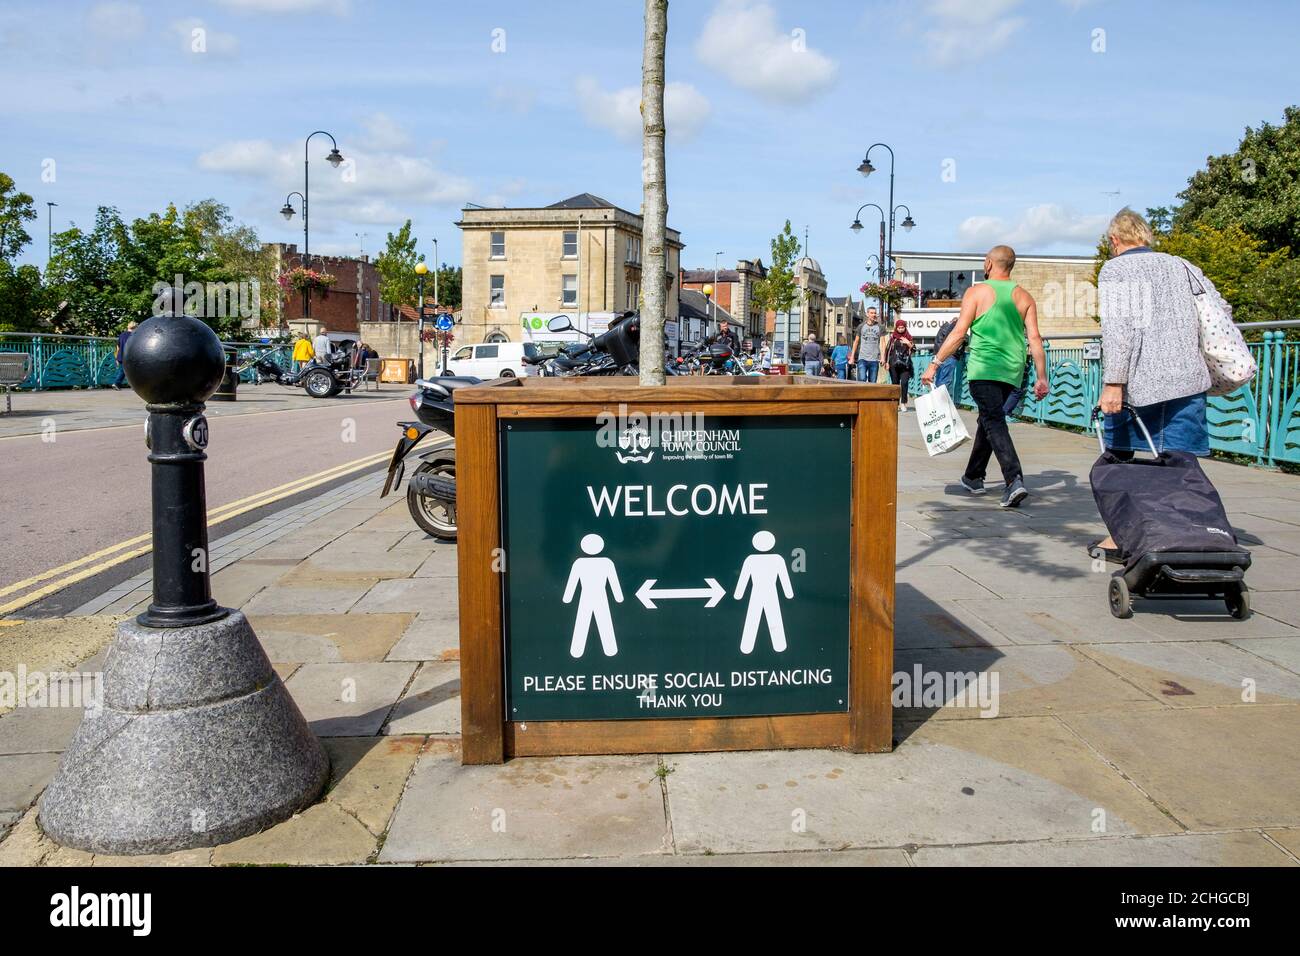 Social distancing signs to remind shoppers to abide by covid 19 social distancing rules are pictured in Chippenham, Wiltshire, UK Stock Photo